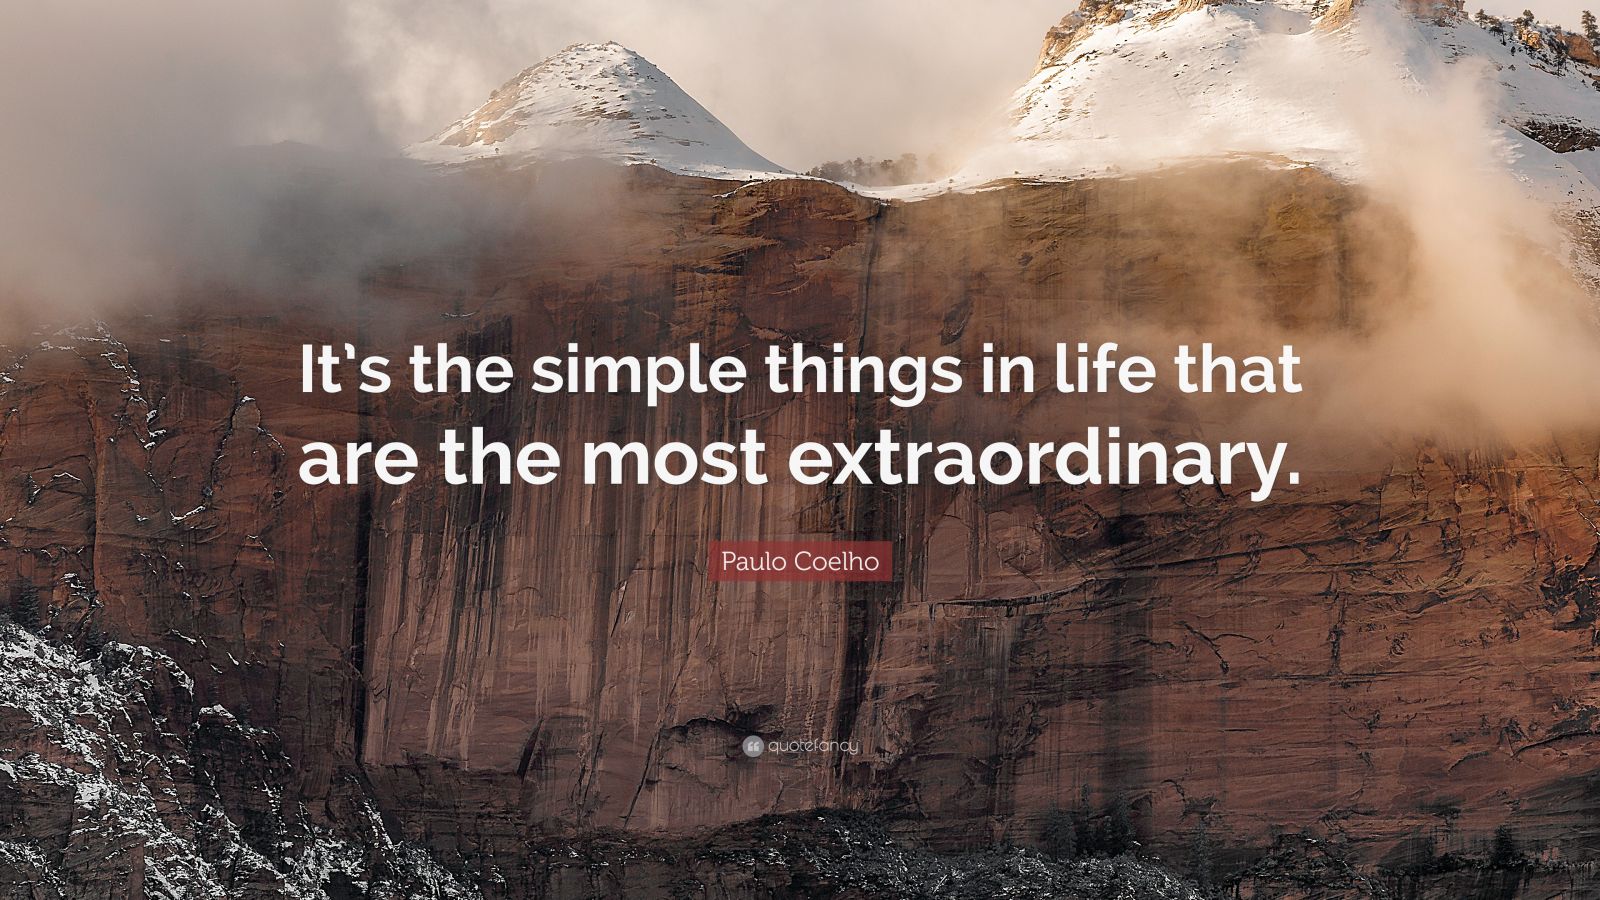 Paulo Coelho Quote “its The Simple Things In Life That Are The Most